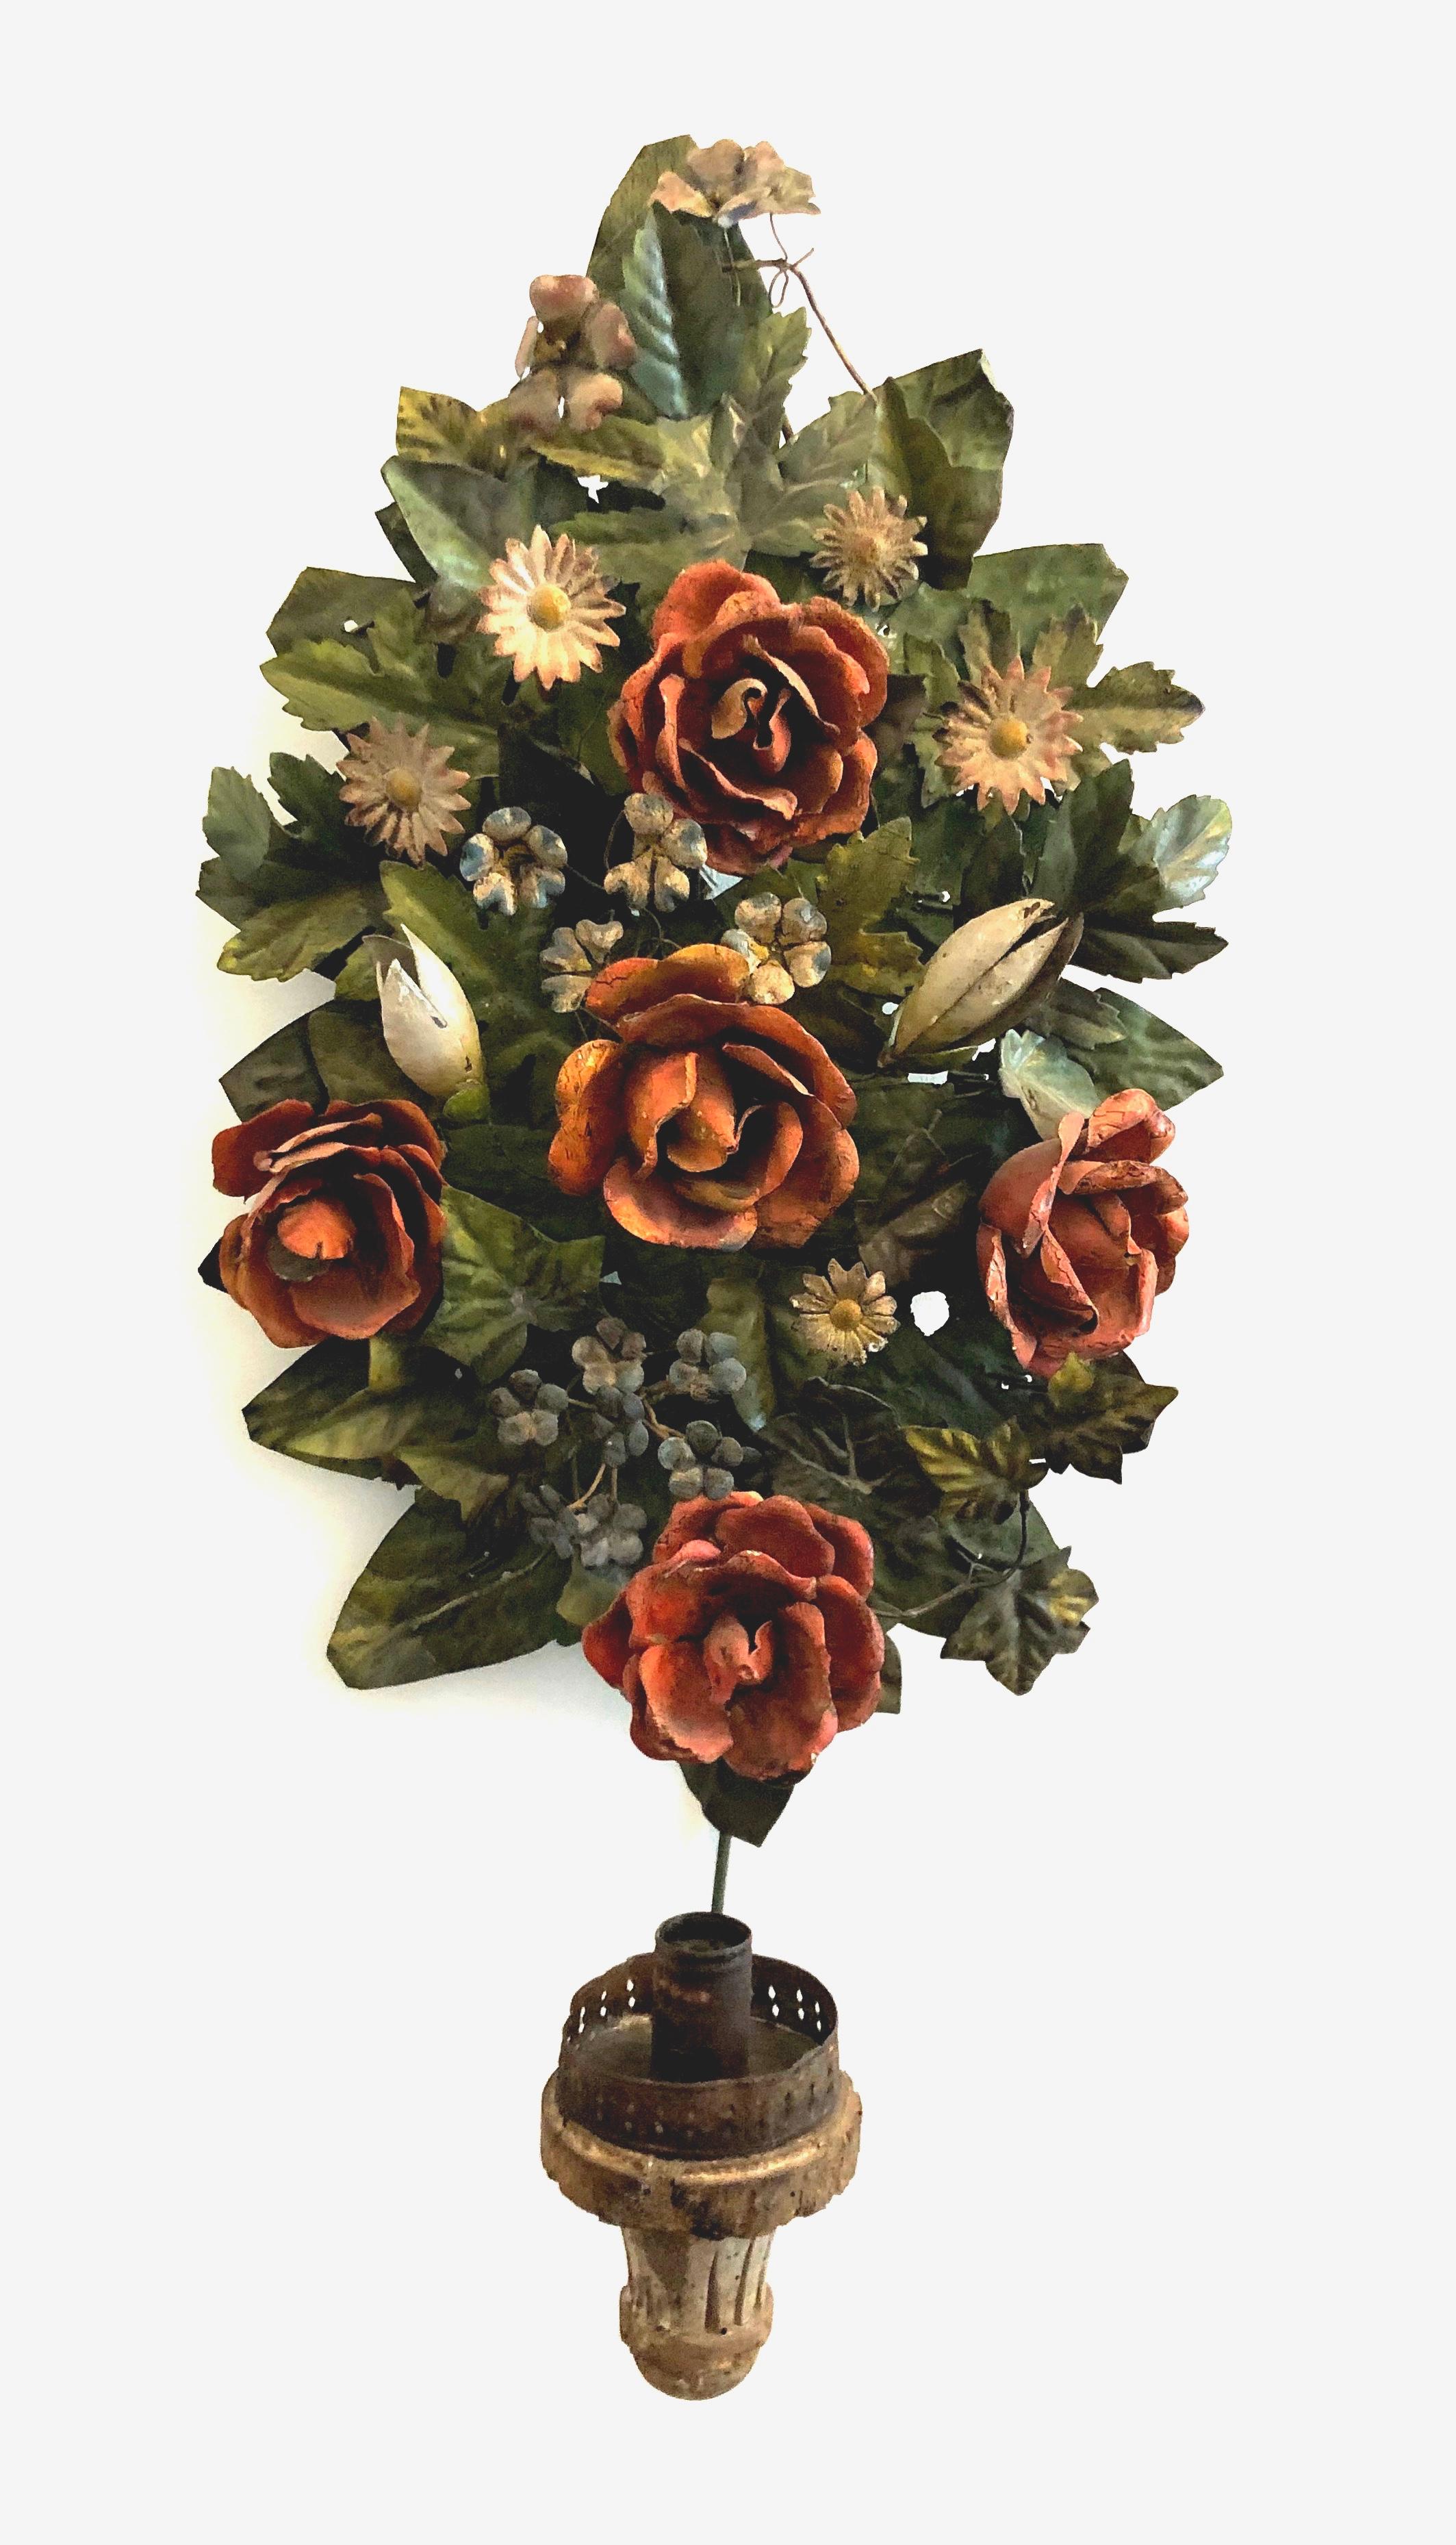 Charming pair of candle appliques made of different colored metal flowers and foliage. Individual flowers and leaves have been tied to a metal frame. The candleholders are made from wood and
metal.